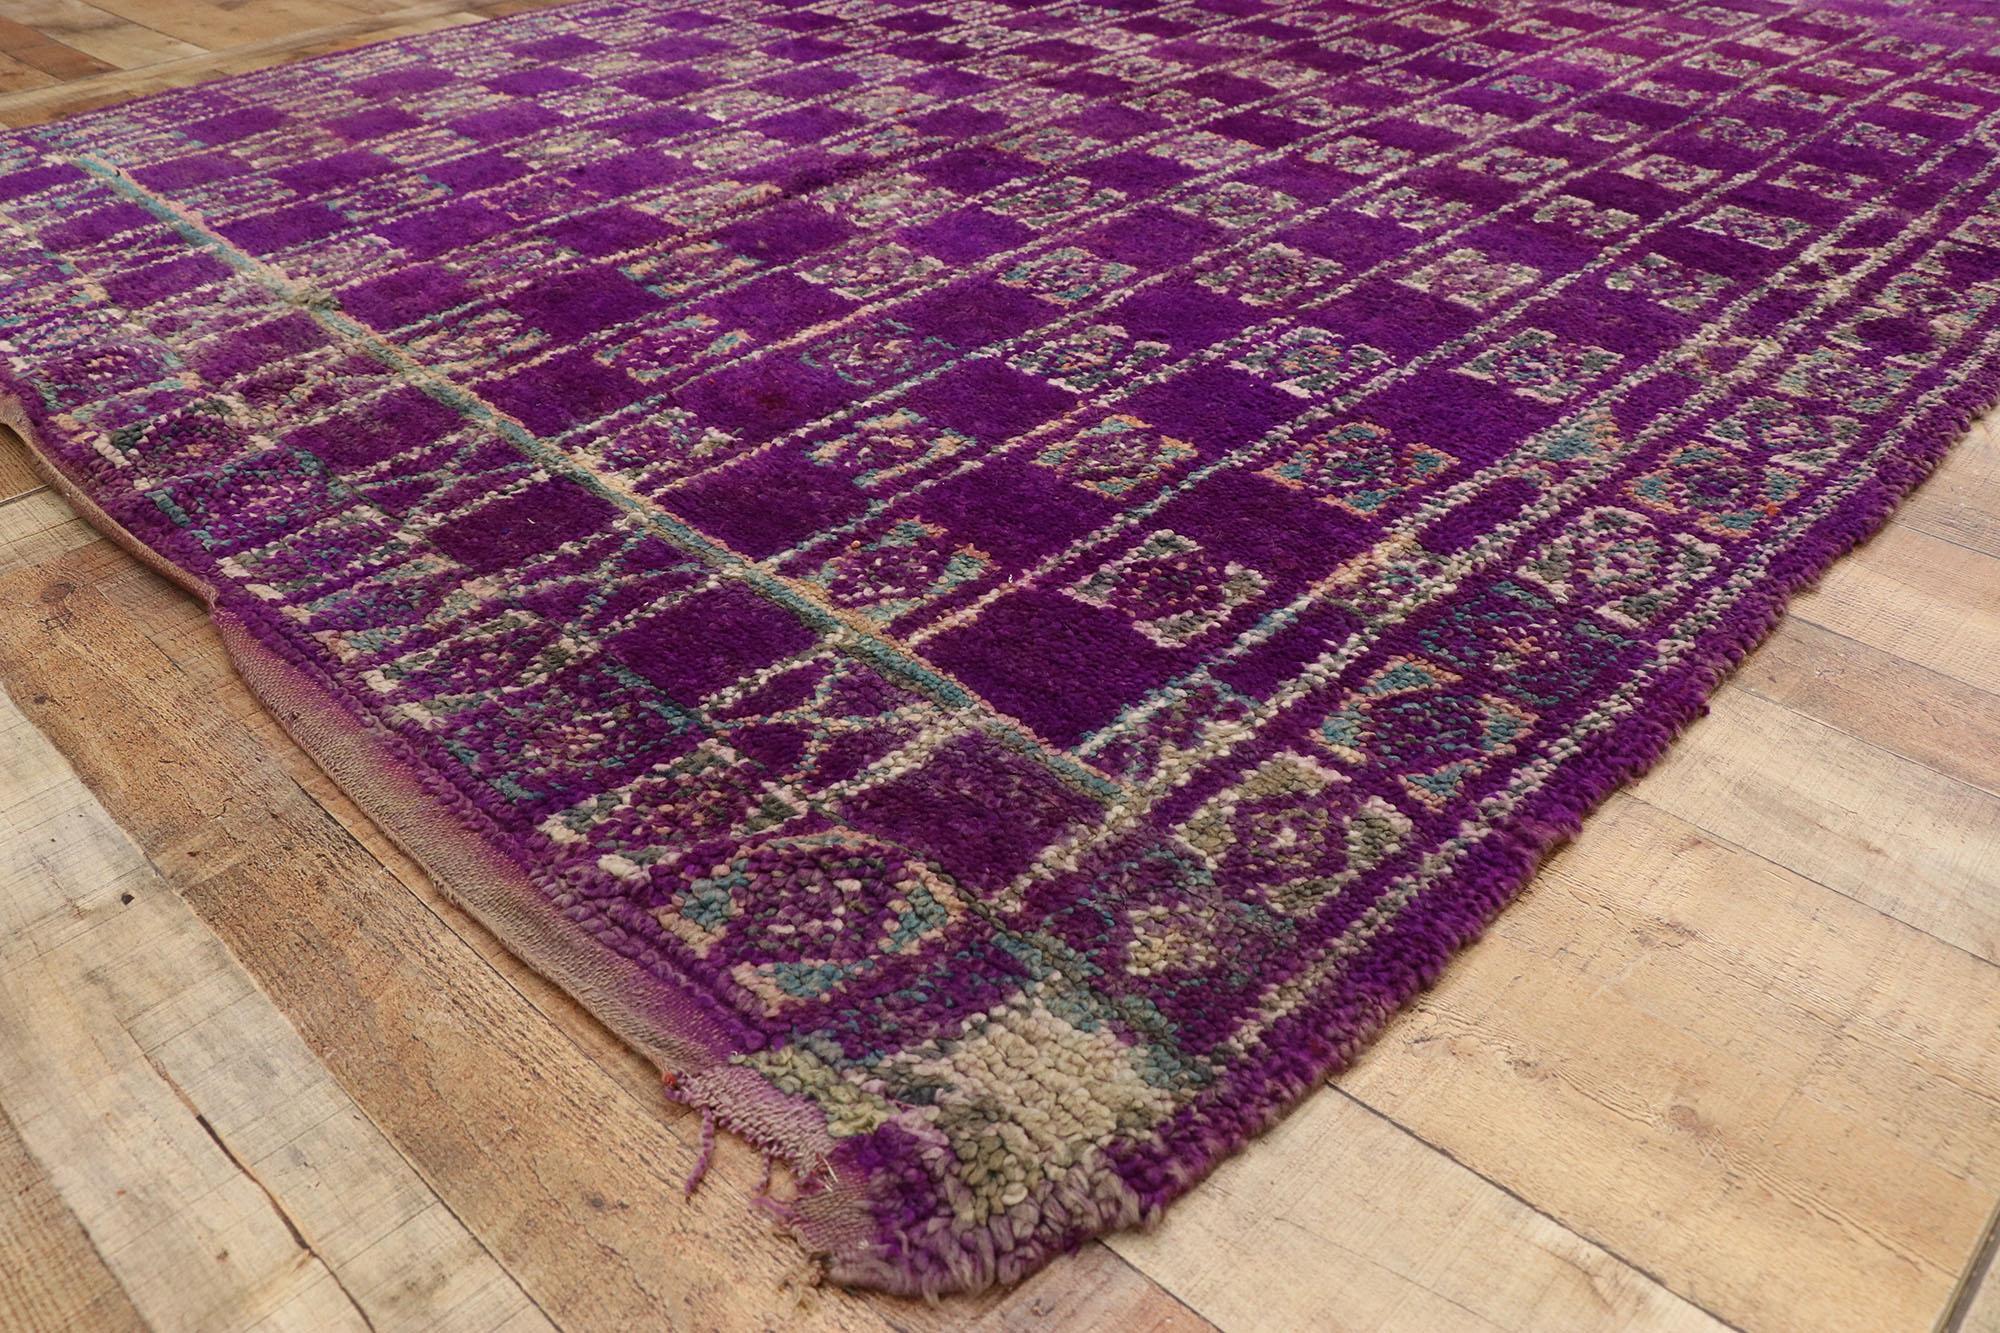 Hand-Knotted Vintage Purple Talsint Moroccan Rug by Berber Tribes of Morocco For Sale